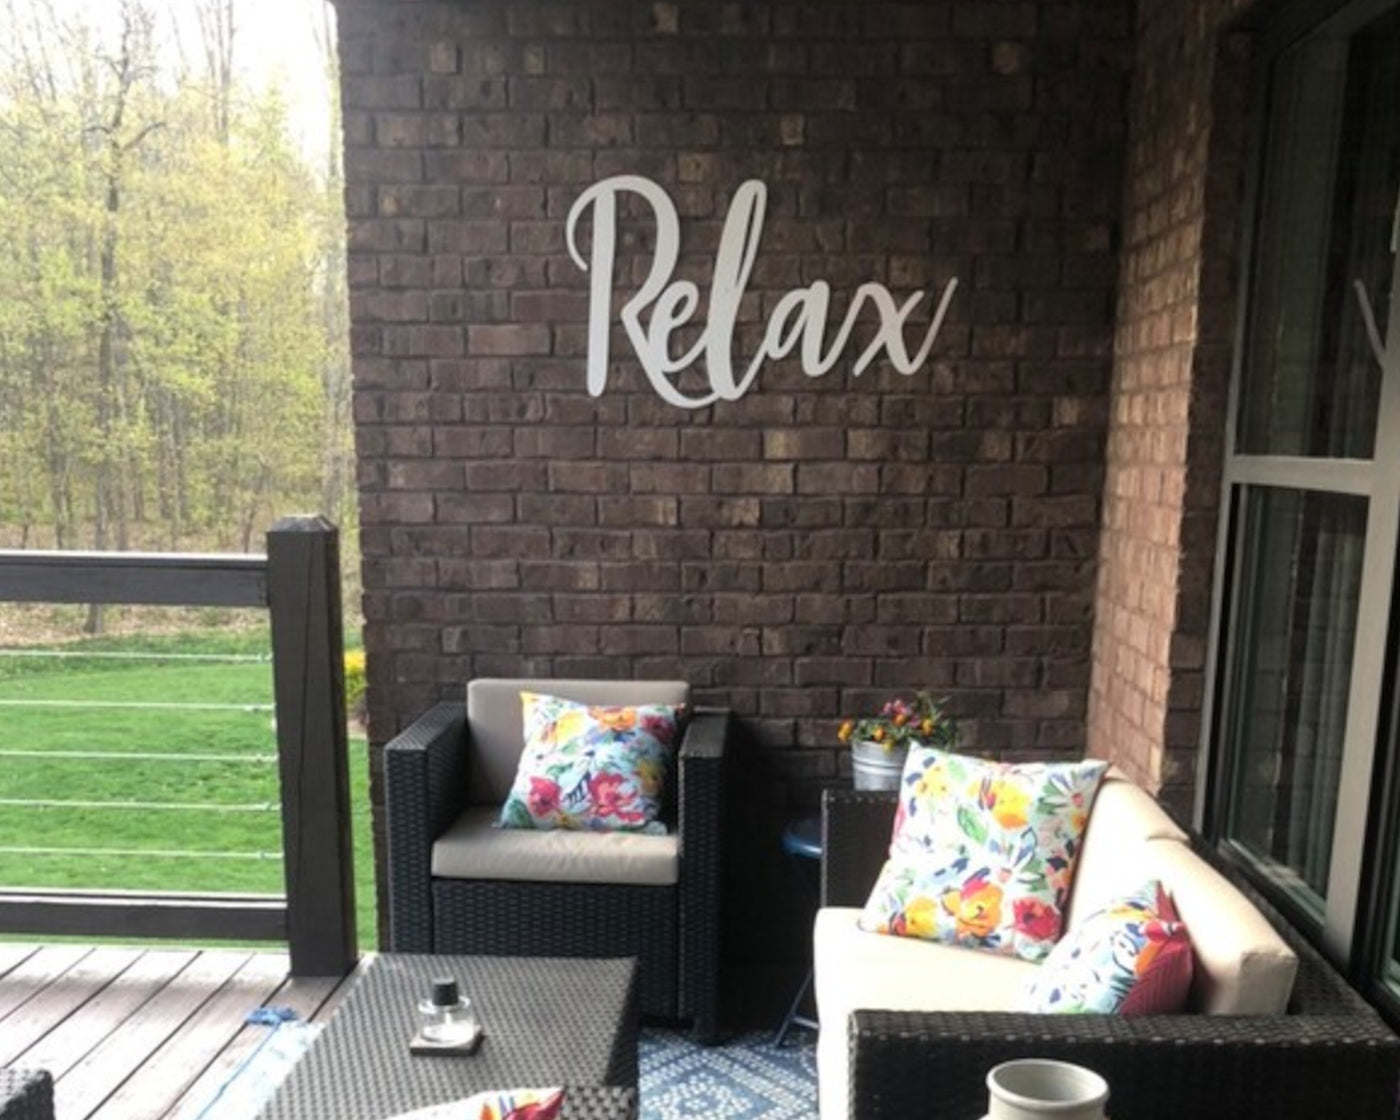 Relax Metal Word Sign - Madison Iron and Wood - Wall Art - metal outdoor decor - Steel deocrations - american made products - veteran owned business products - fencing decorations - fencing supplies - custom wall decorations - personalized wall signs - steel - decorative post caps - steel post caps - metal post caps - brackets - structural brackets - home improvement - easter - easter decorations - easter gift - easter yard decor